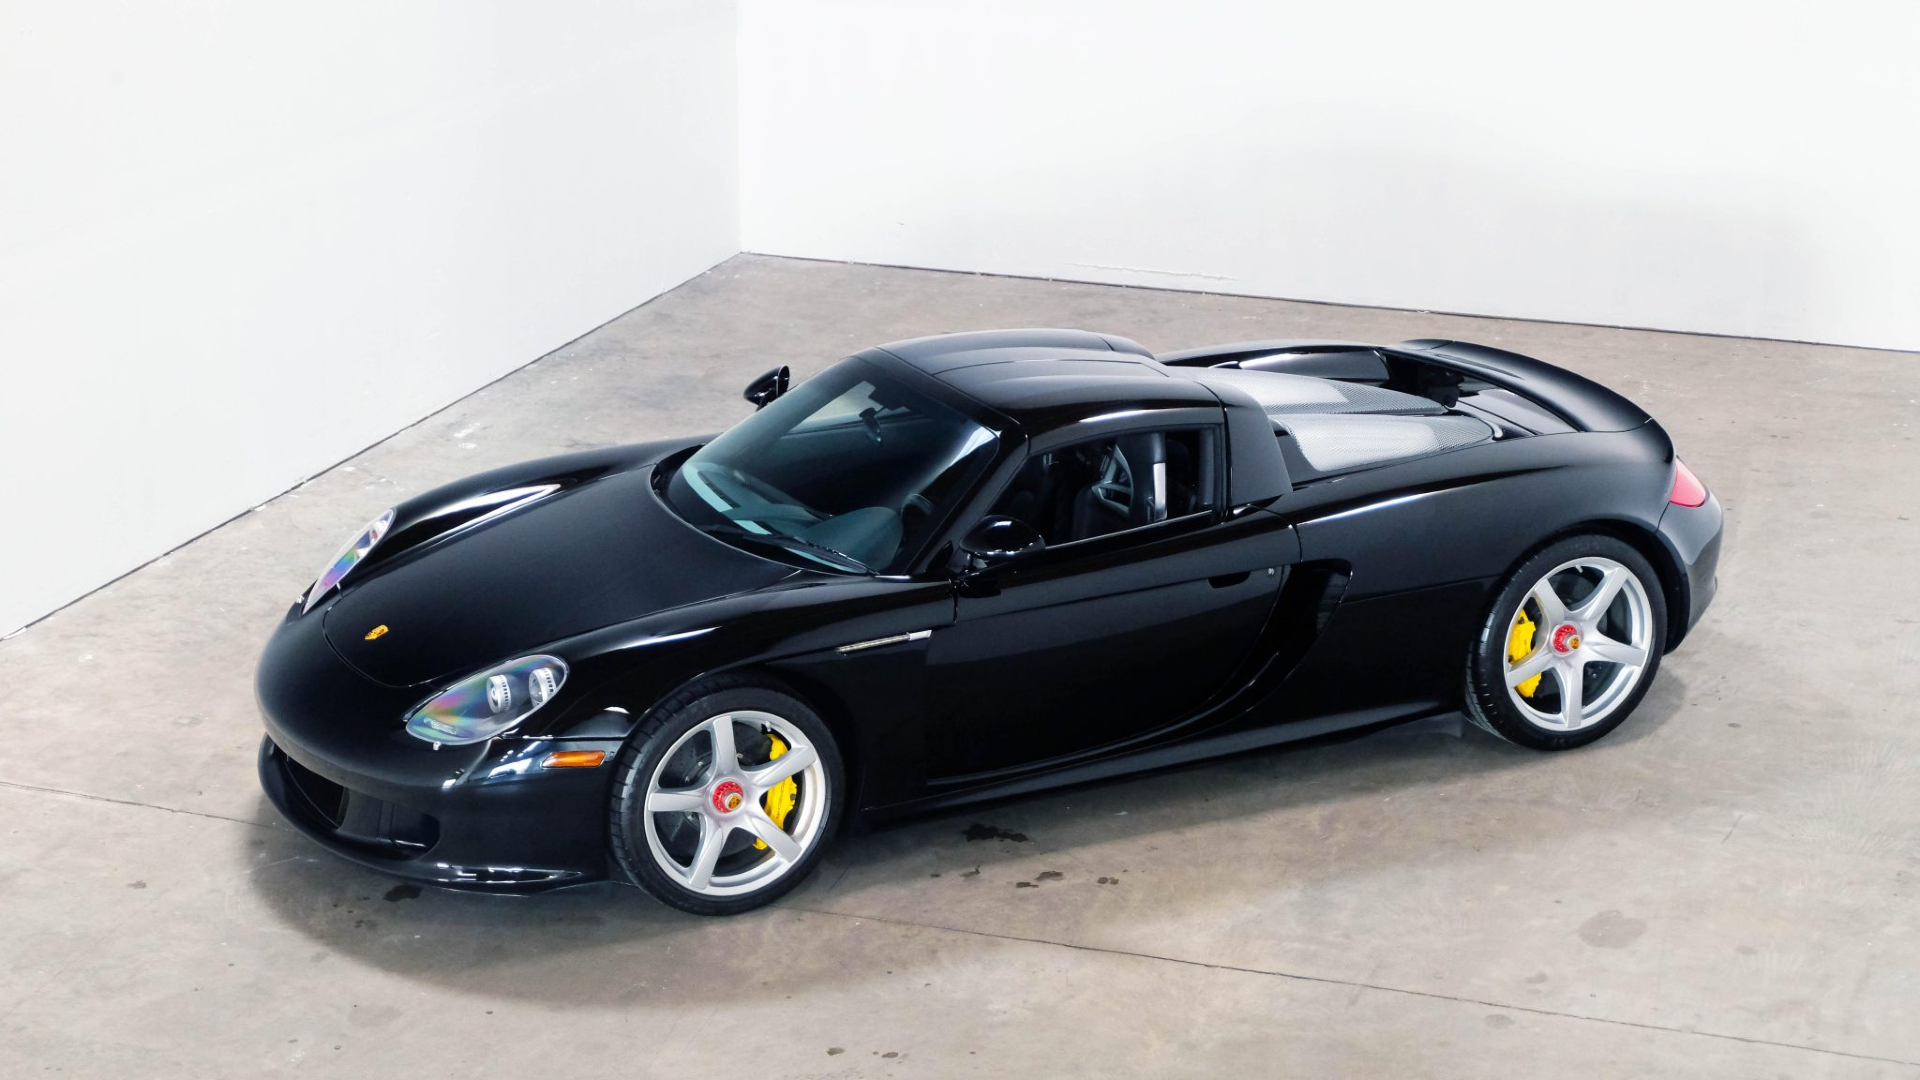 A Rare Porsche Carrera GT Owned By Jerry Seinfeld Is Up For Auction